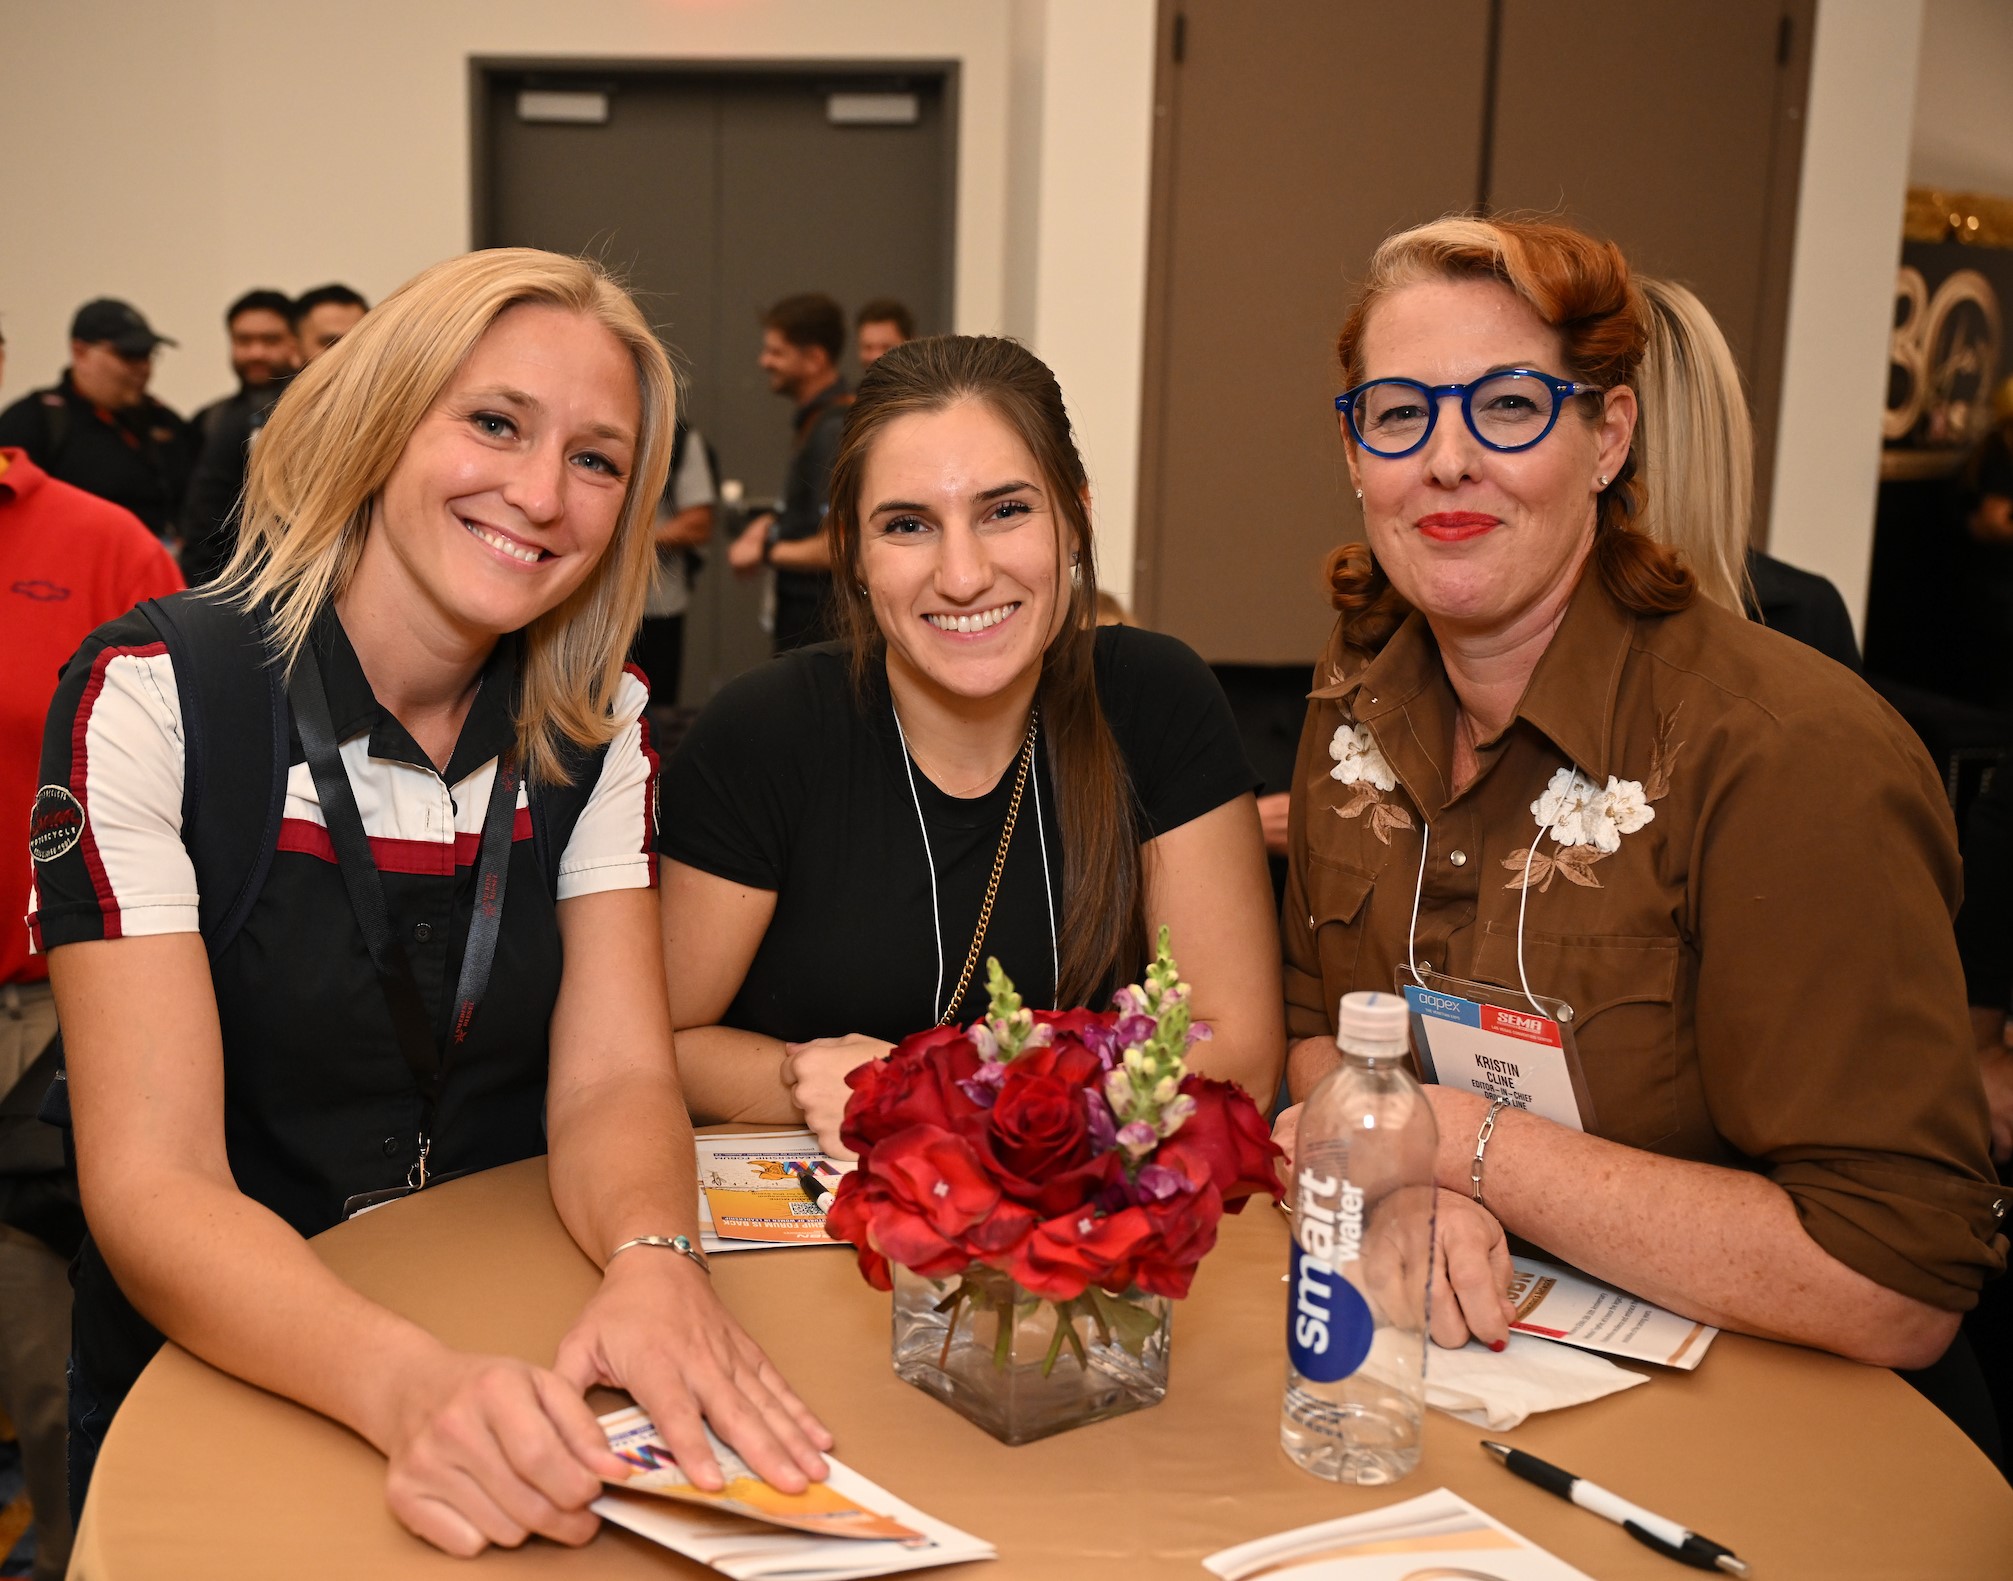 Mark Your Calendars for Upcoming SBN Events - Image of three ladies at a table with smiles